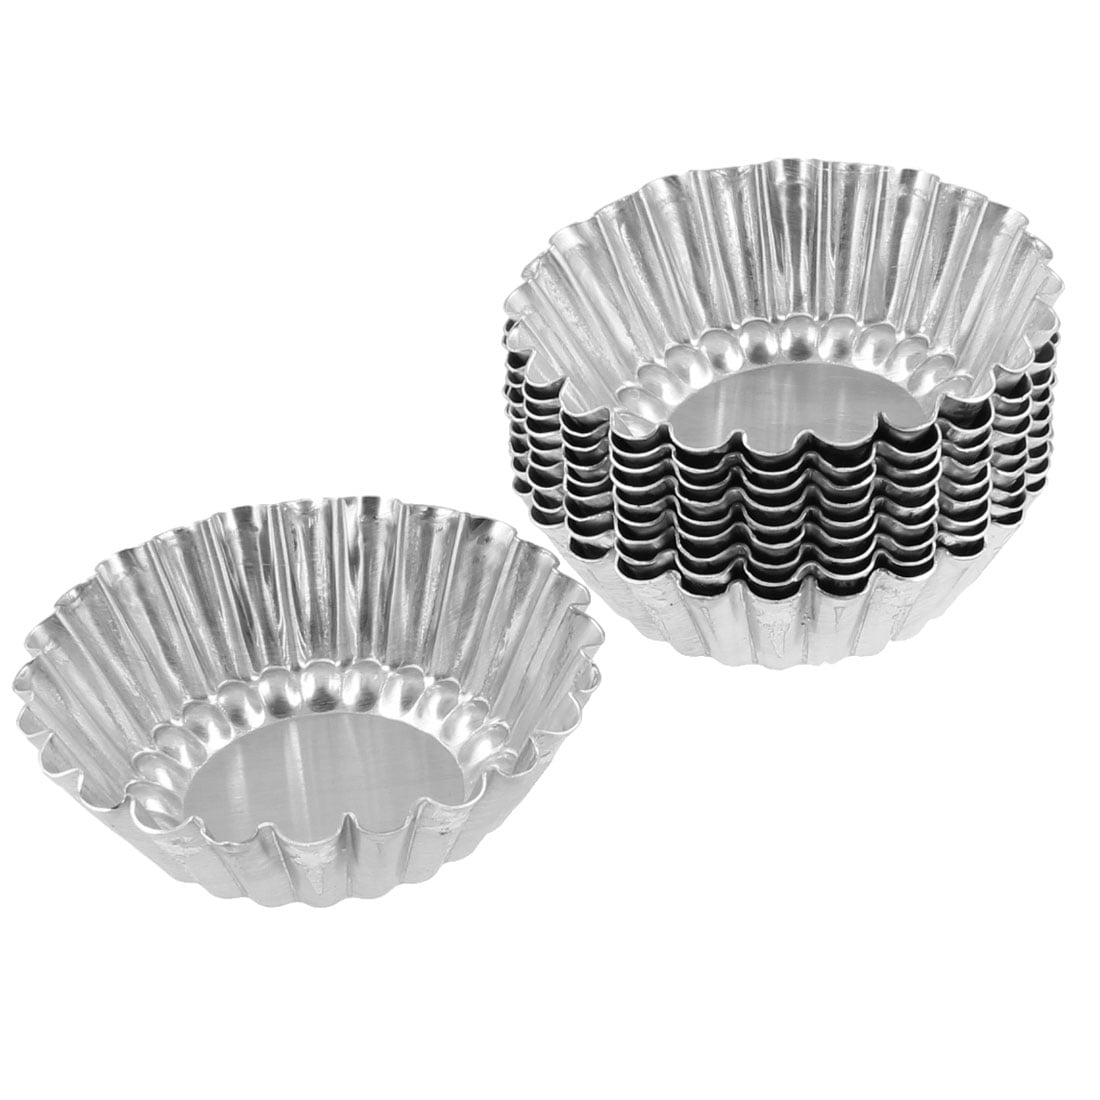 Fuxinghao 150Pcs Disposable Egg Tart Molds Aluminum Foil Mould Mini Tiny Pie Muffin Cupcake Pans Tin Bakeware Cake Cookie Mold Cup 